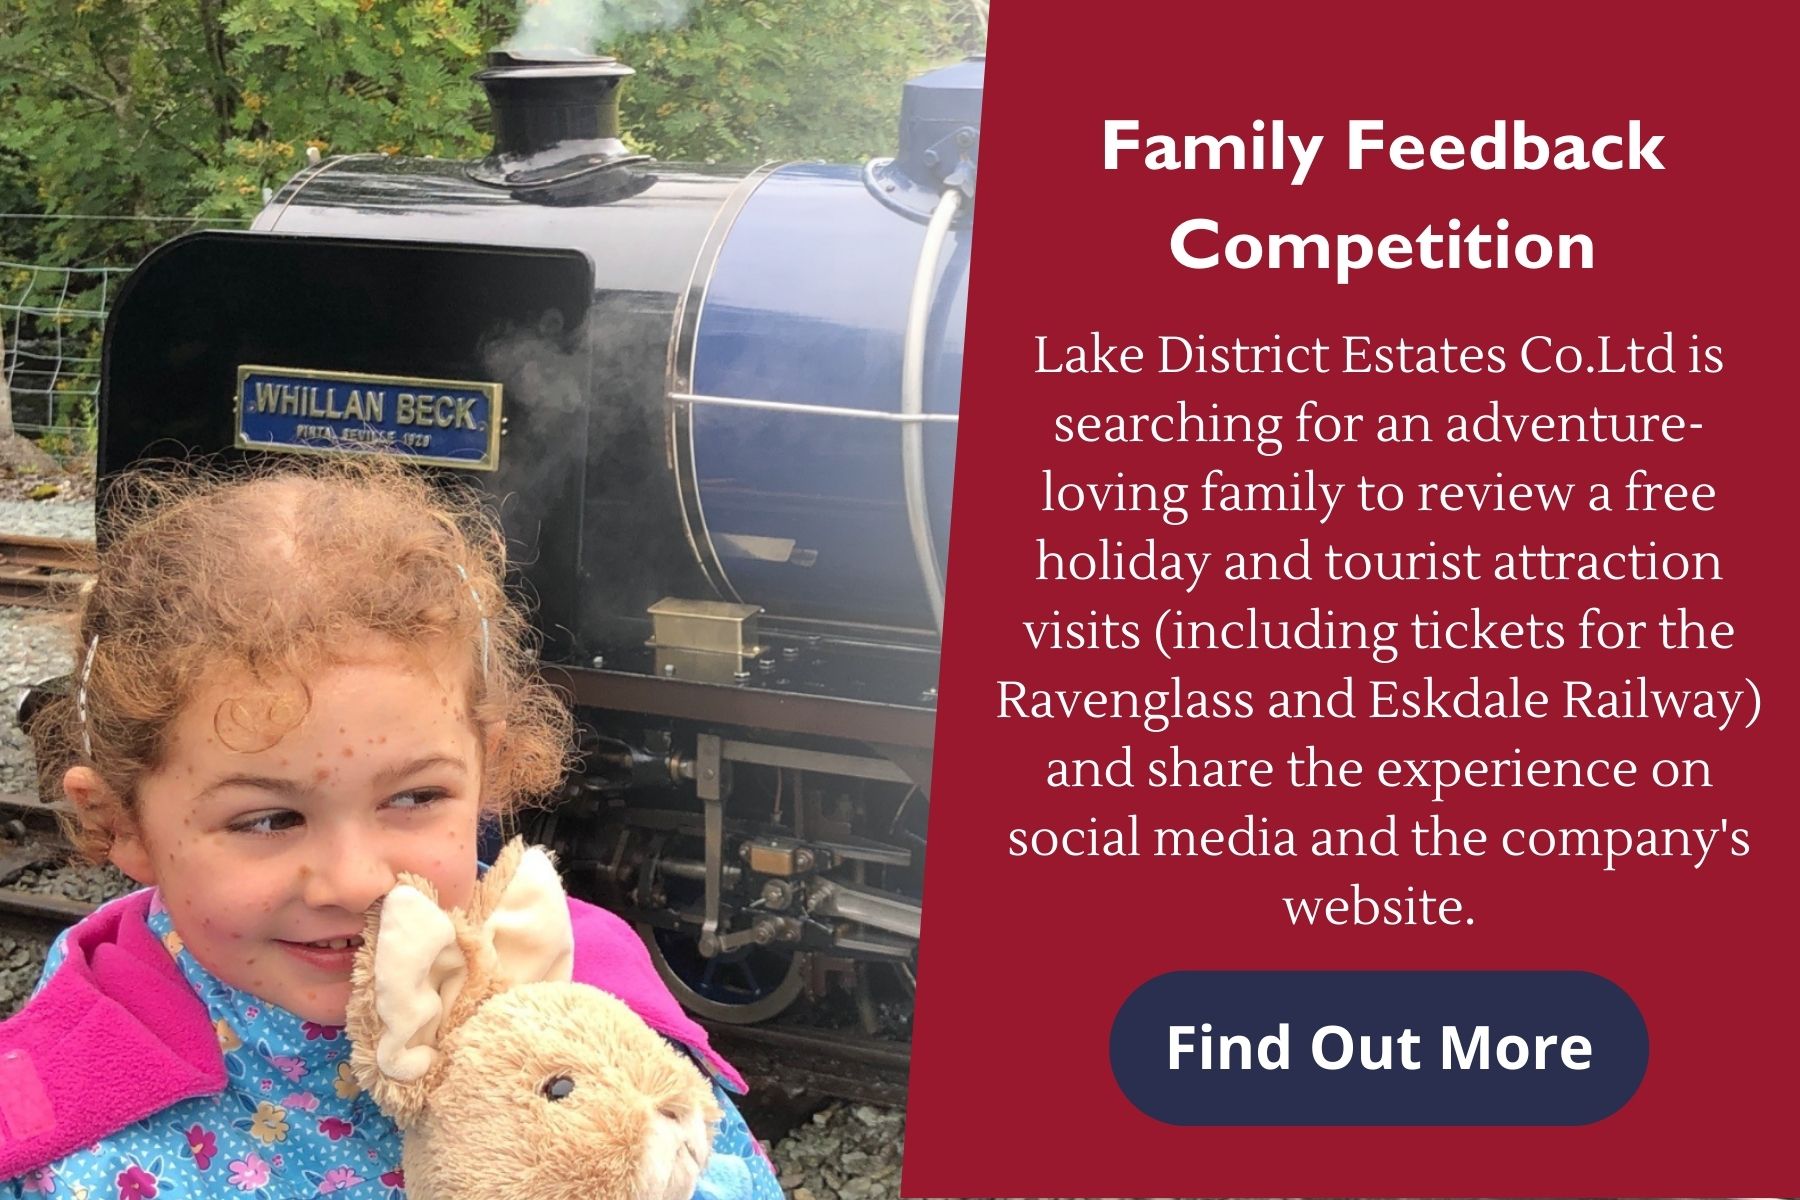 Family Feedback Competition